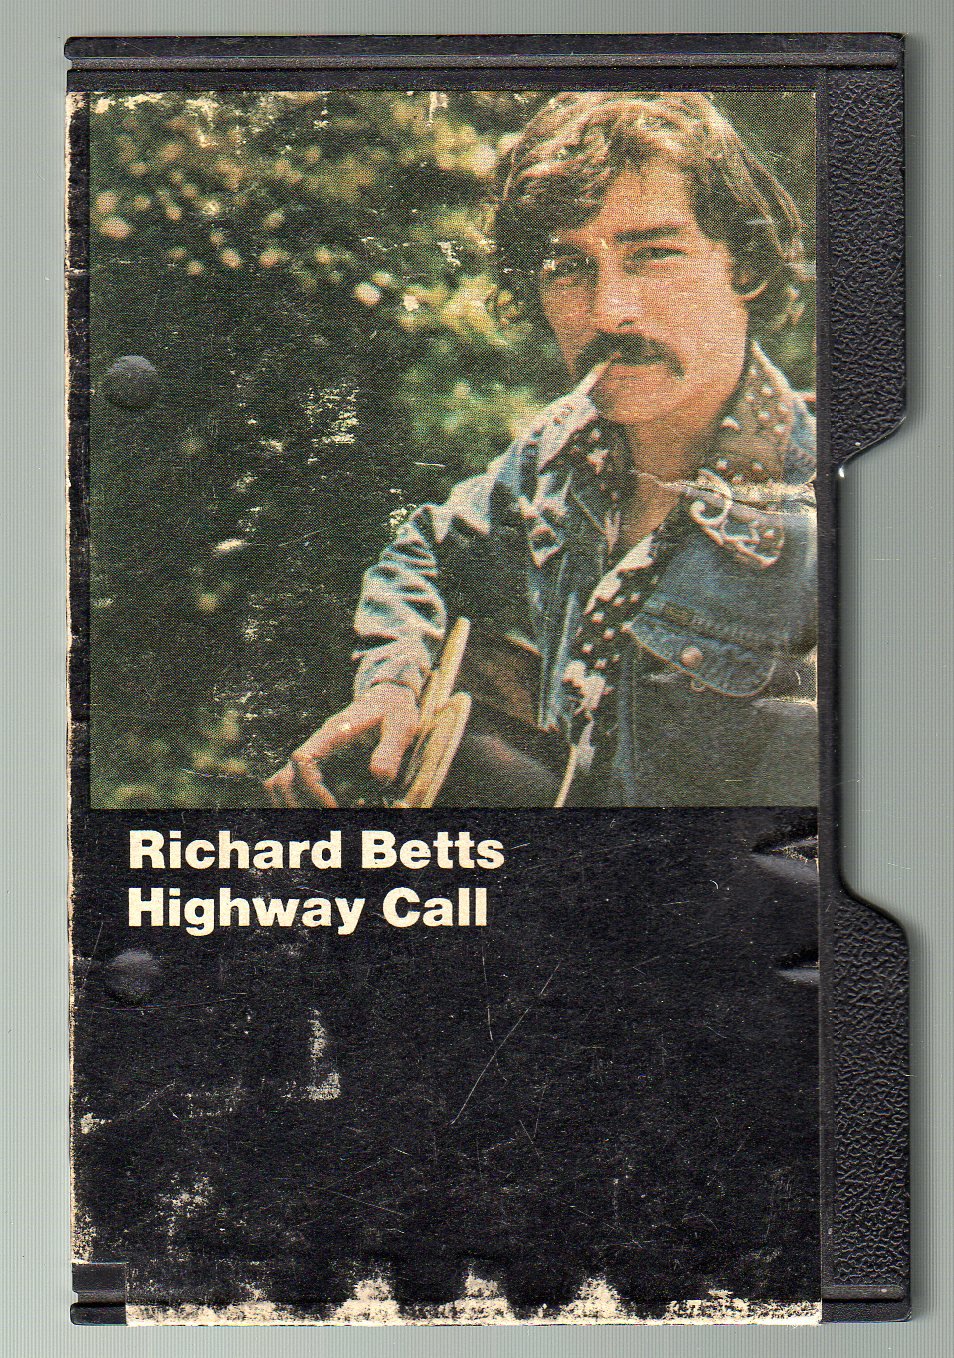 richard betts highway call discogs marketplace